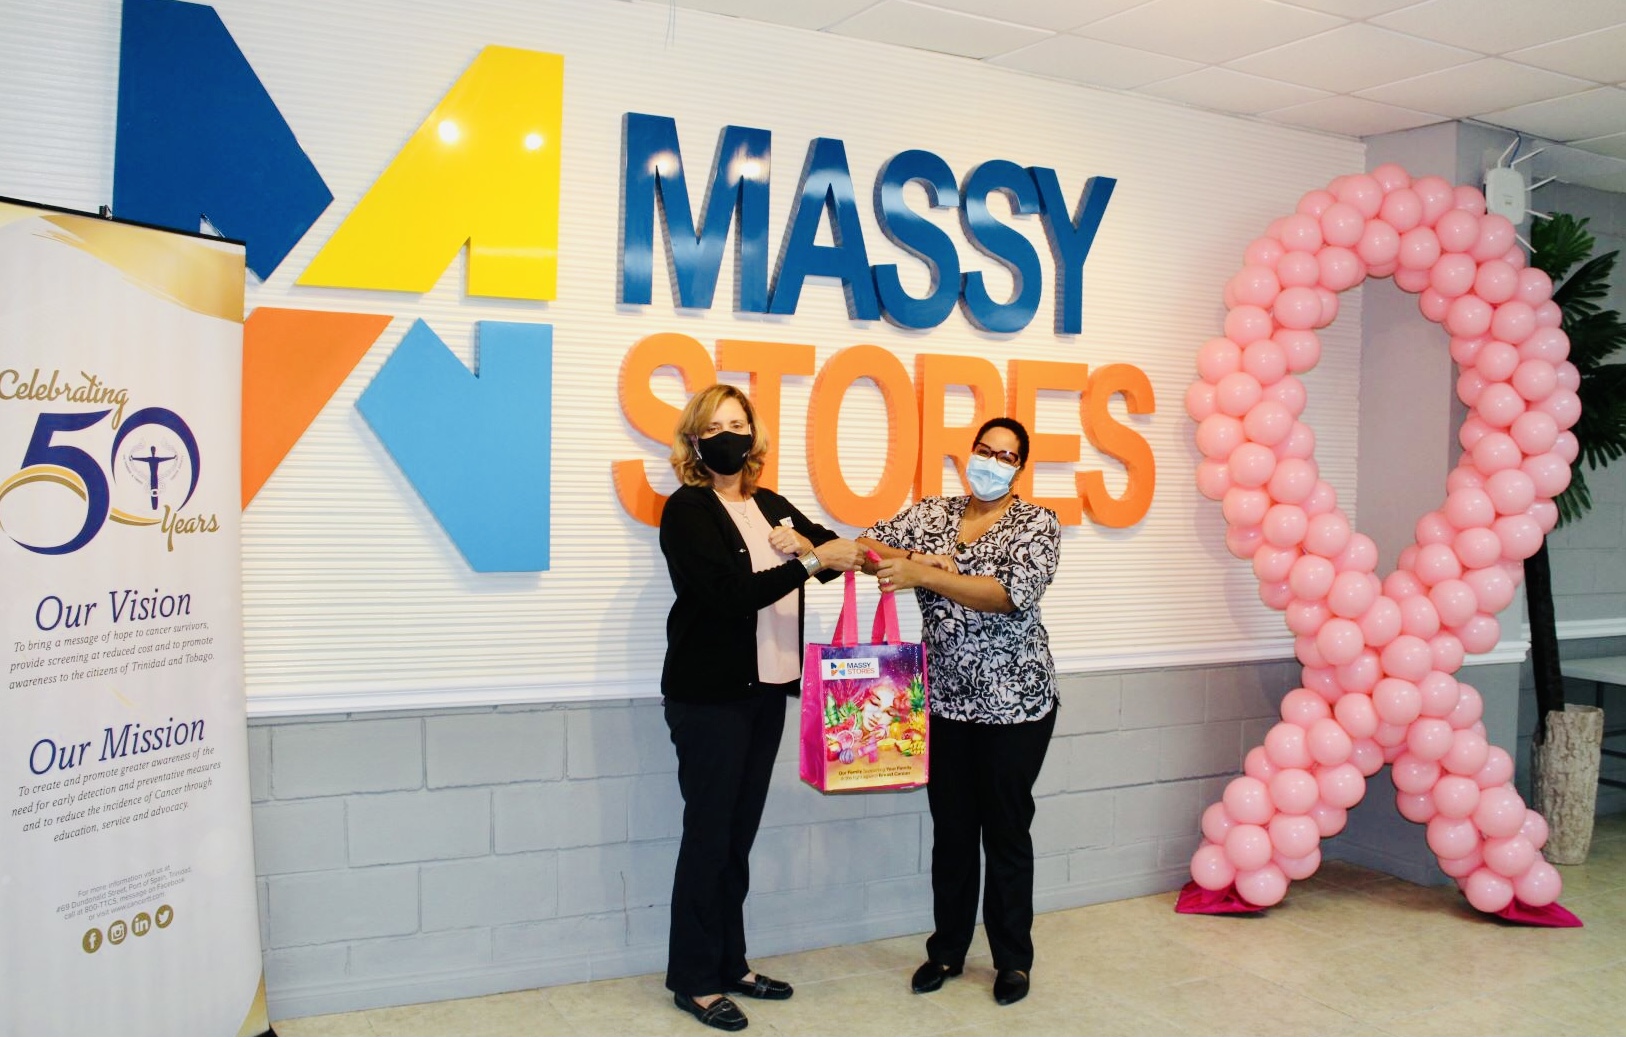 Massy raises funds for breast cancer with release of pink shopping bags